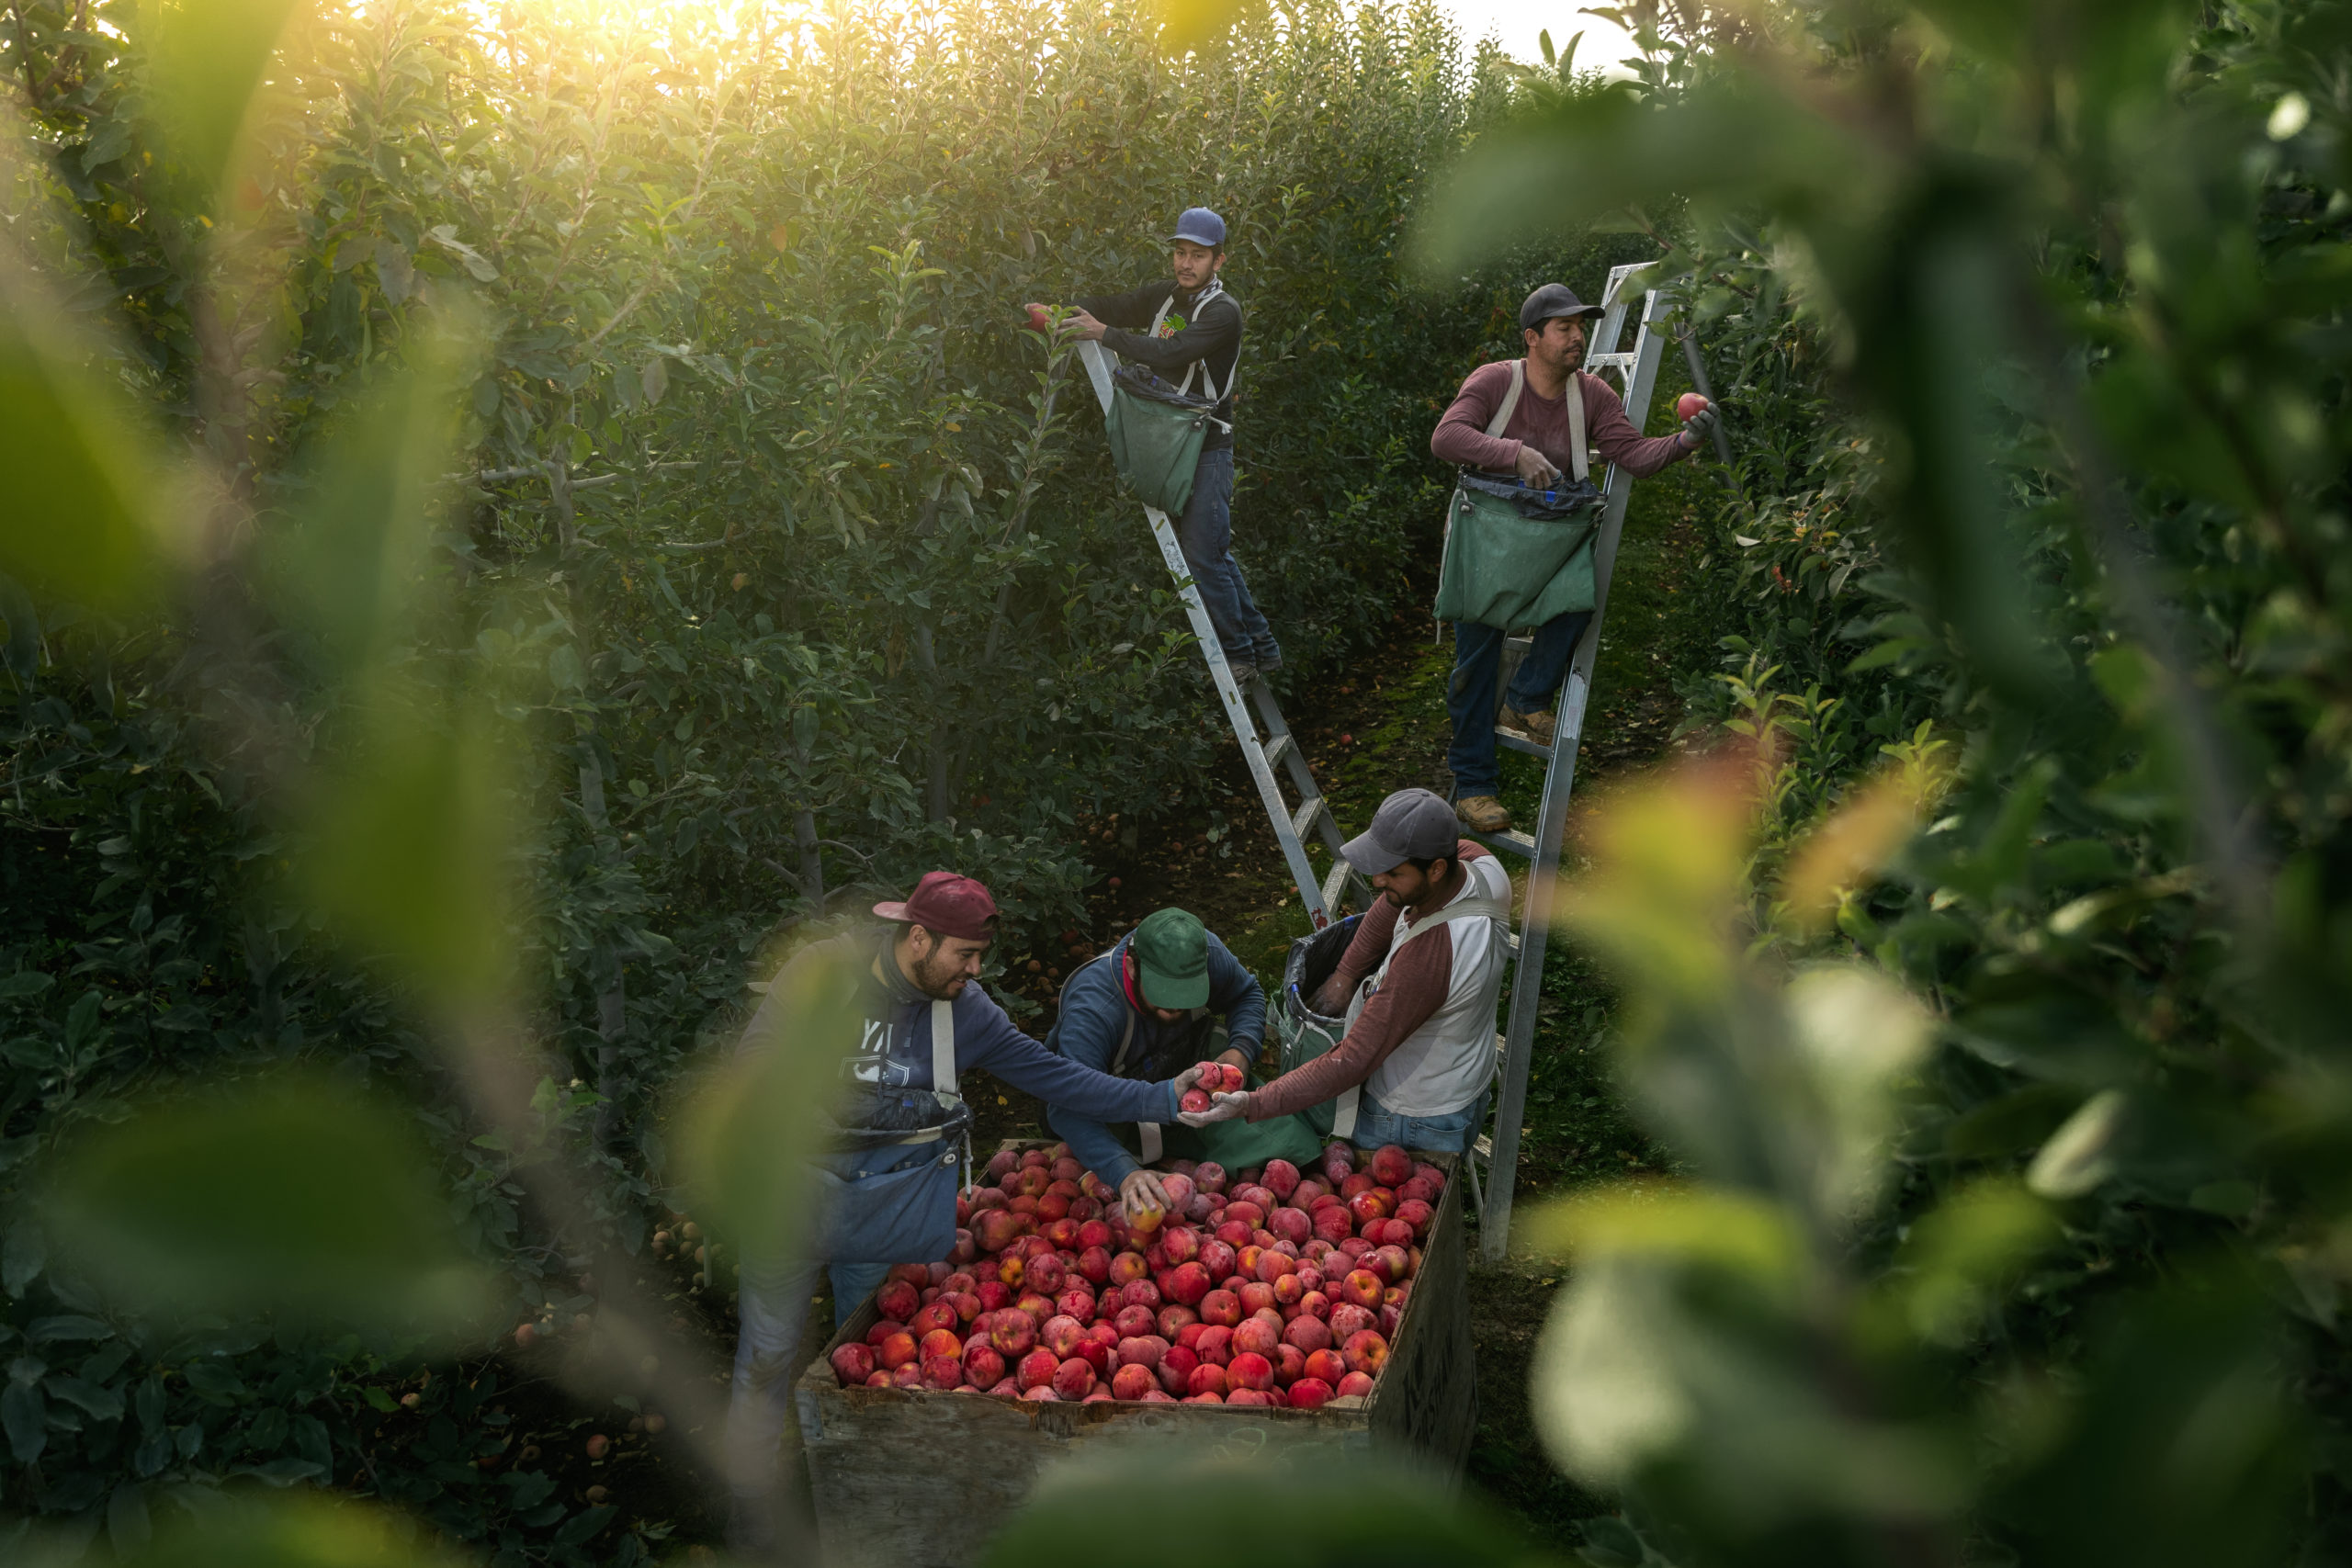 Migrant farm workers pick apples at an orchard in Yakima, Washington